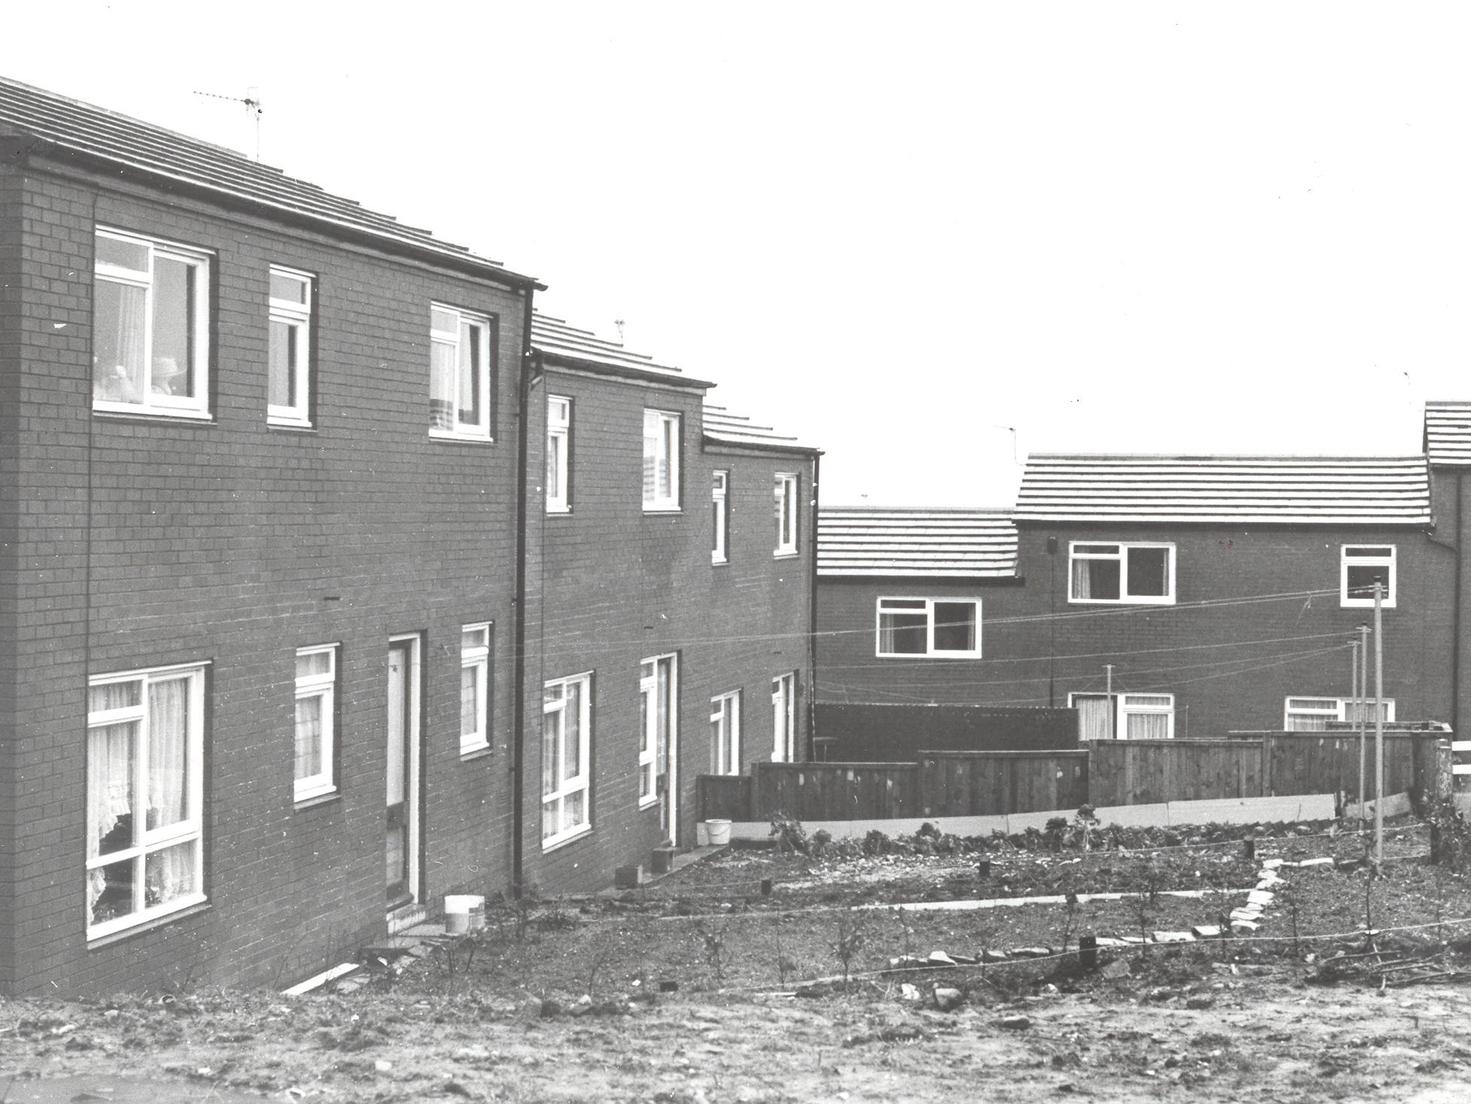 Where some of the former residents of The Hopes were living... new council housing in Ley Lane.